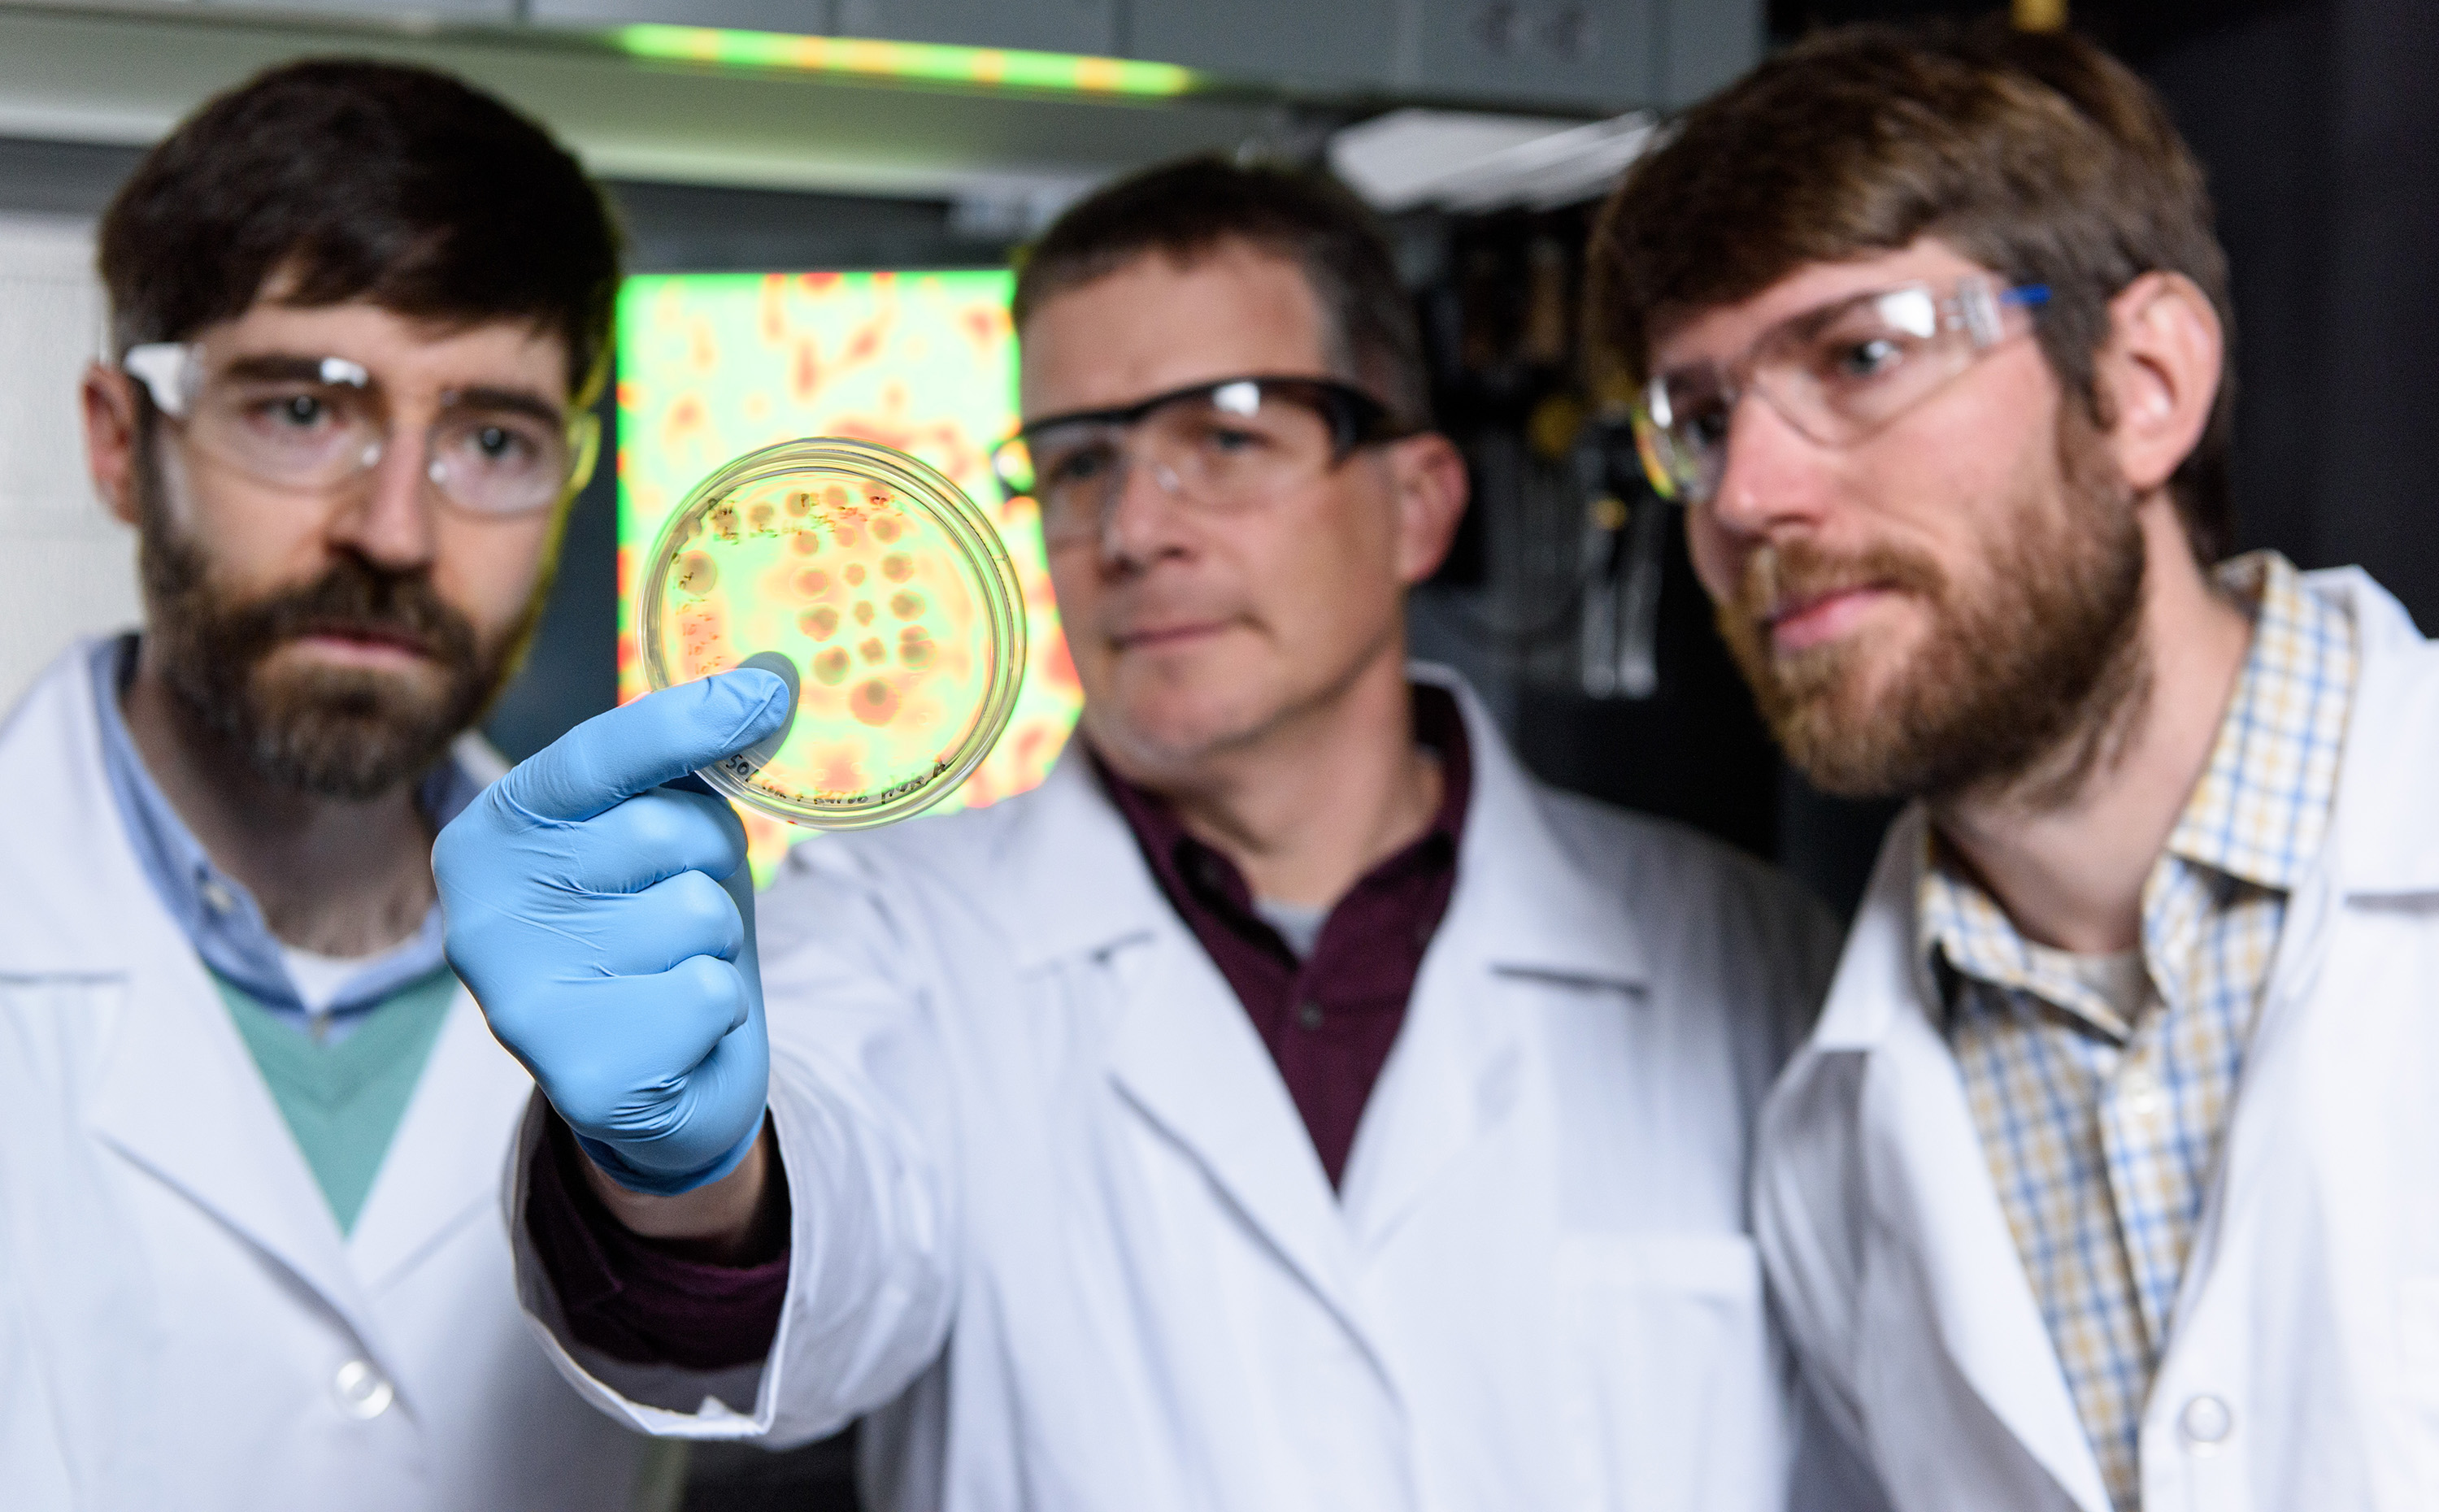 Physicist Peter Yunker, microbiologist Brian Hammer, and evolutionary biologist Will Ratcliff (left to right) in Yunker's lab at Georgia Tech with cultures of Vibrio cholerae and a monitor screen displaying bacteria that have phase separated into divided colonies. Credit: Georgia Tech / Rob Felt